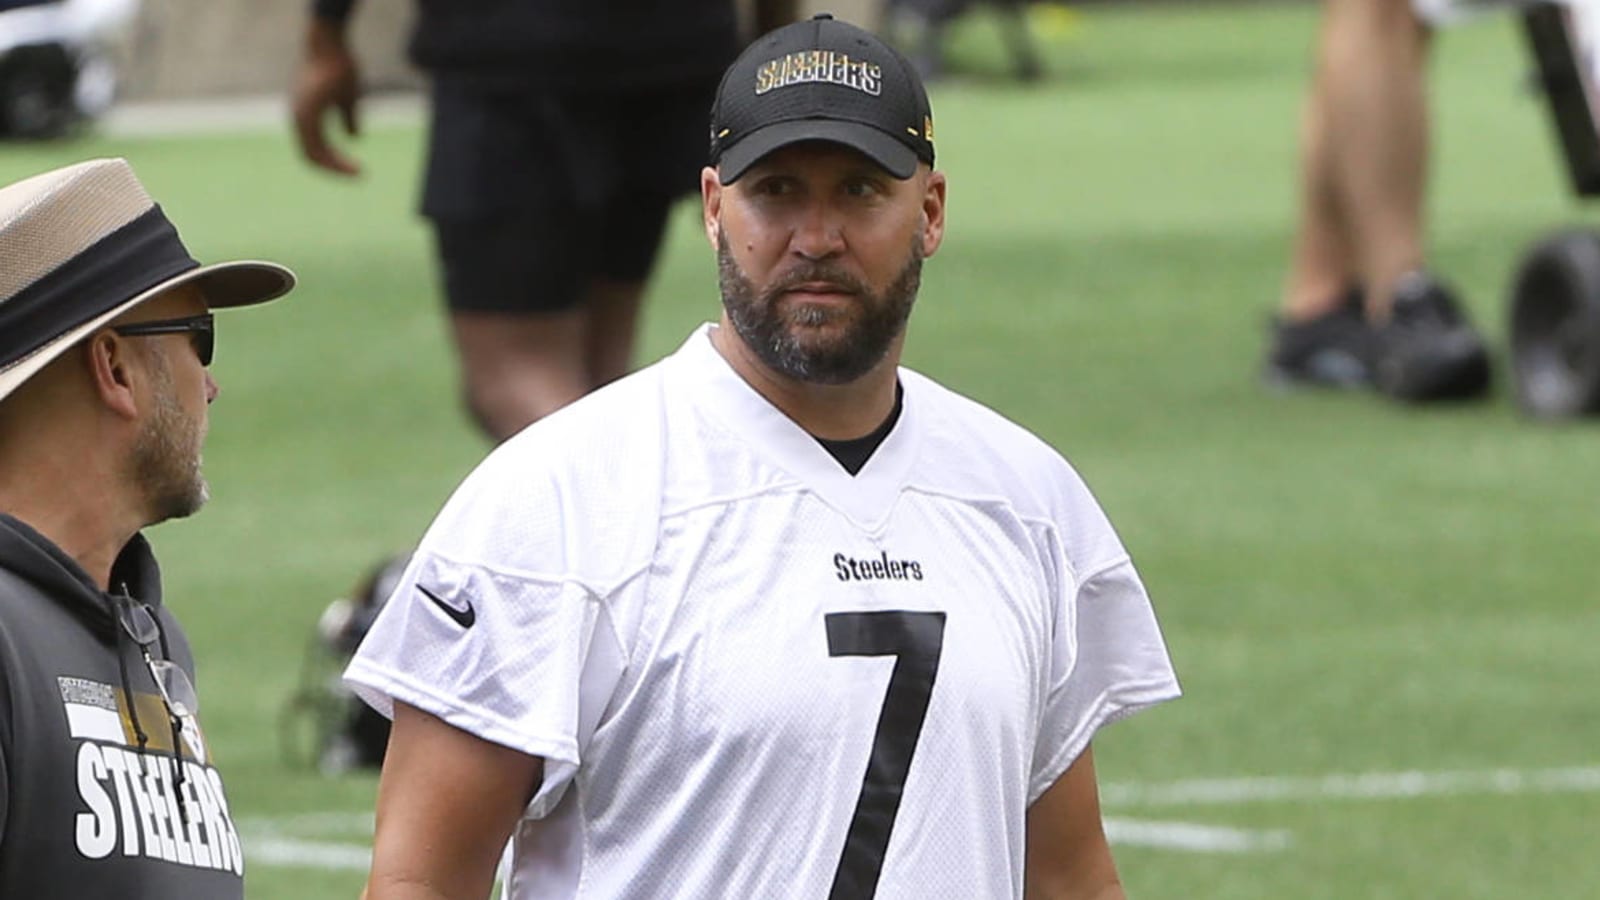 Report: Ben Roethlisberger 'obsessed' with weight loss, diet